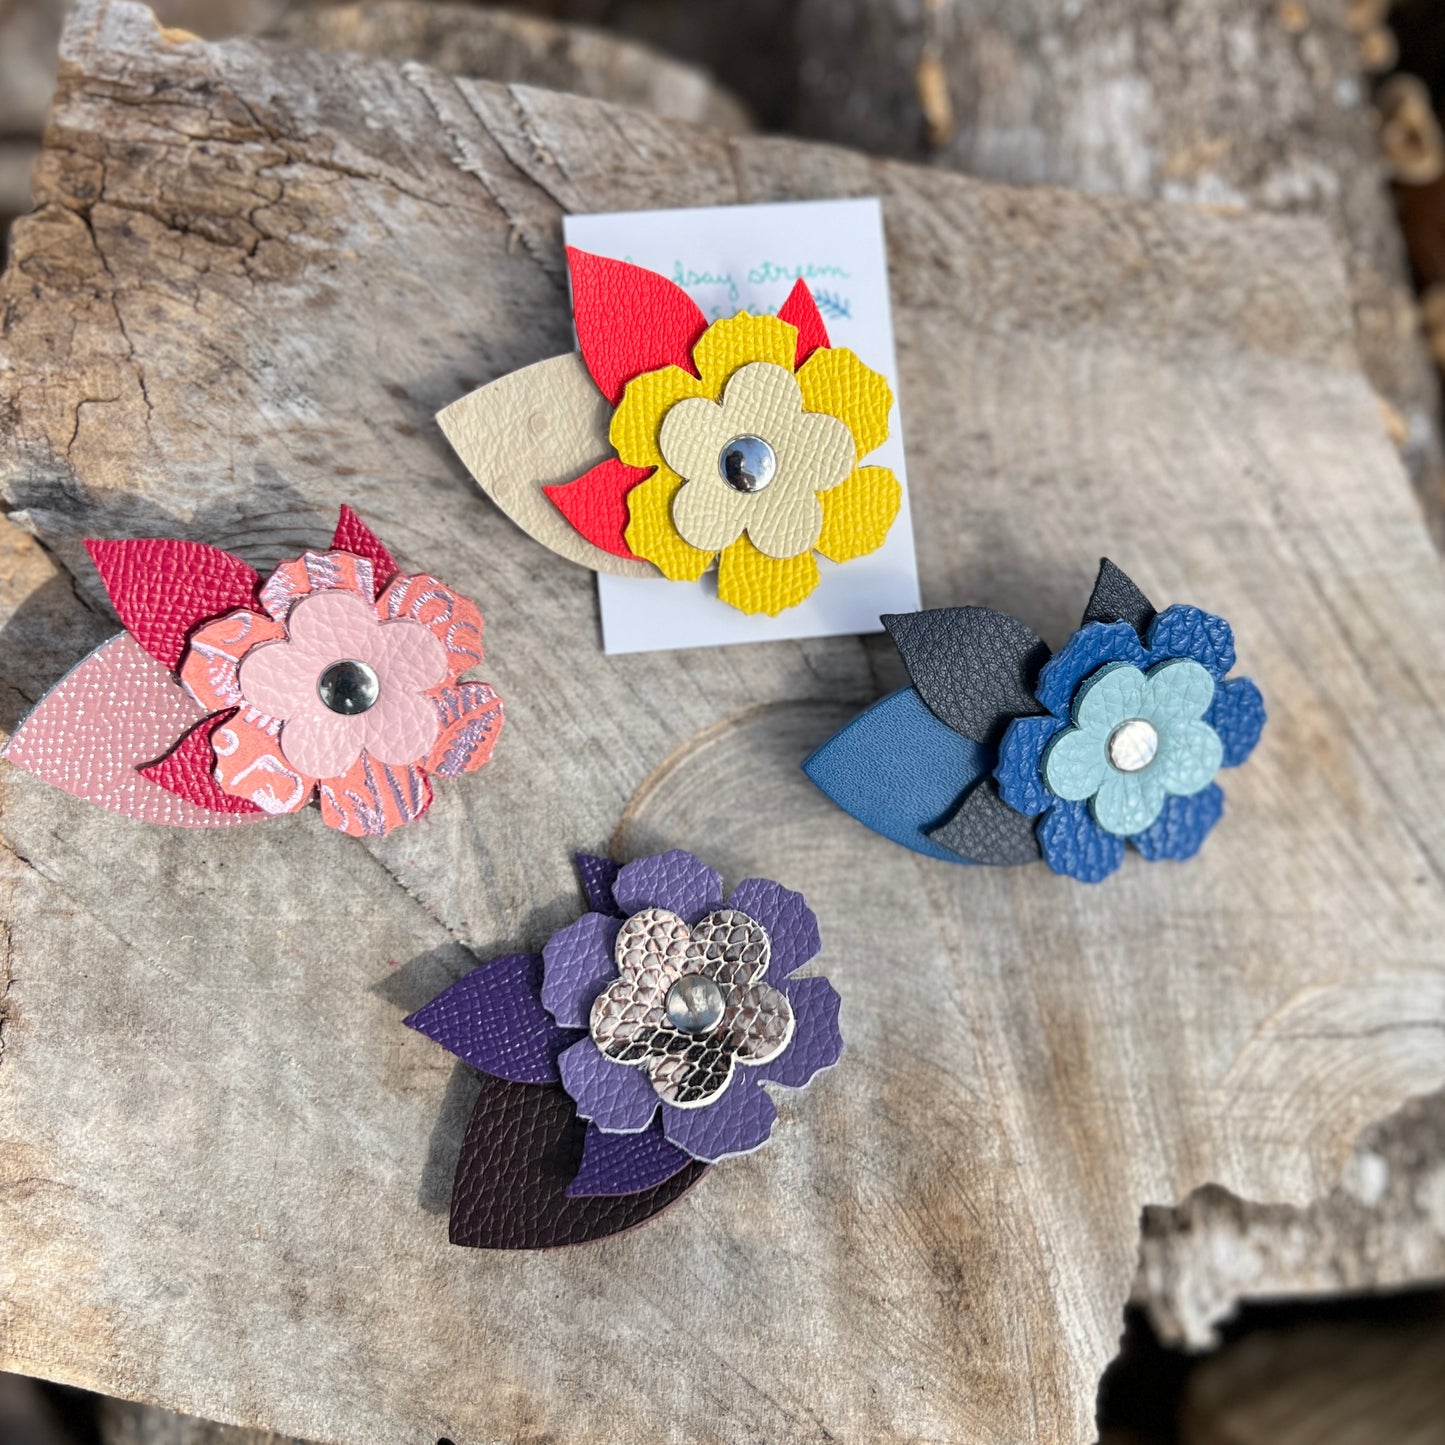 Small Leather Flower Pin Brooch - Bright and Colorful